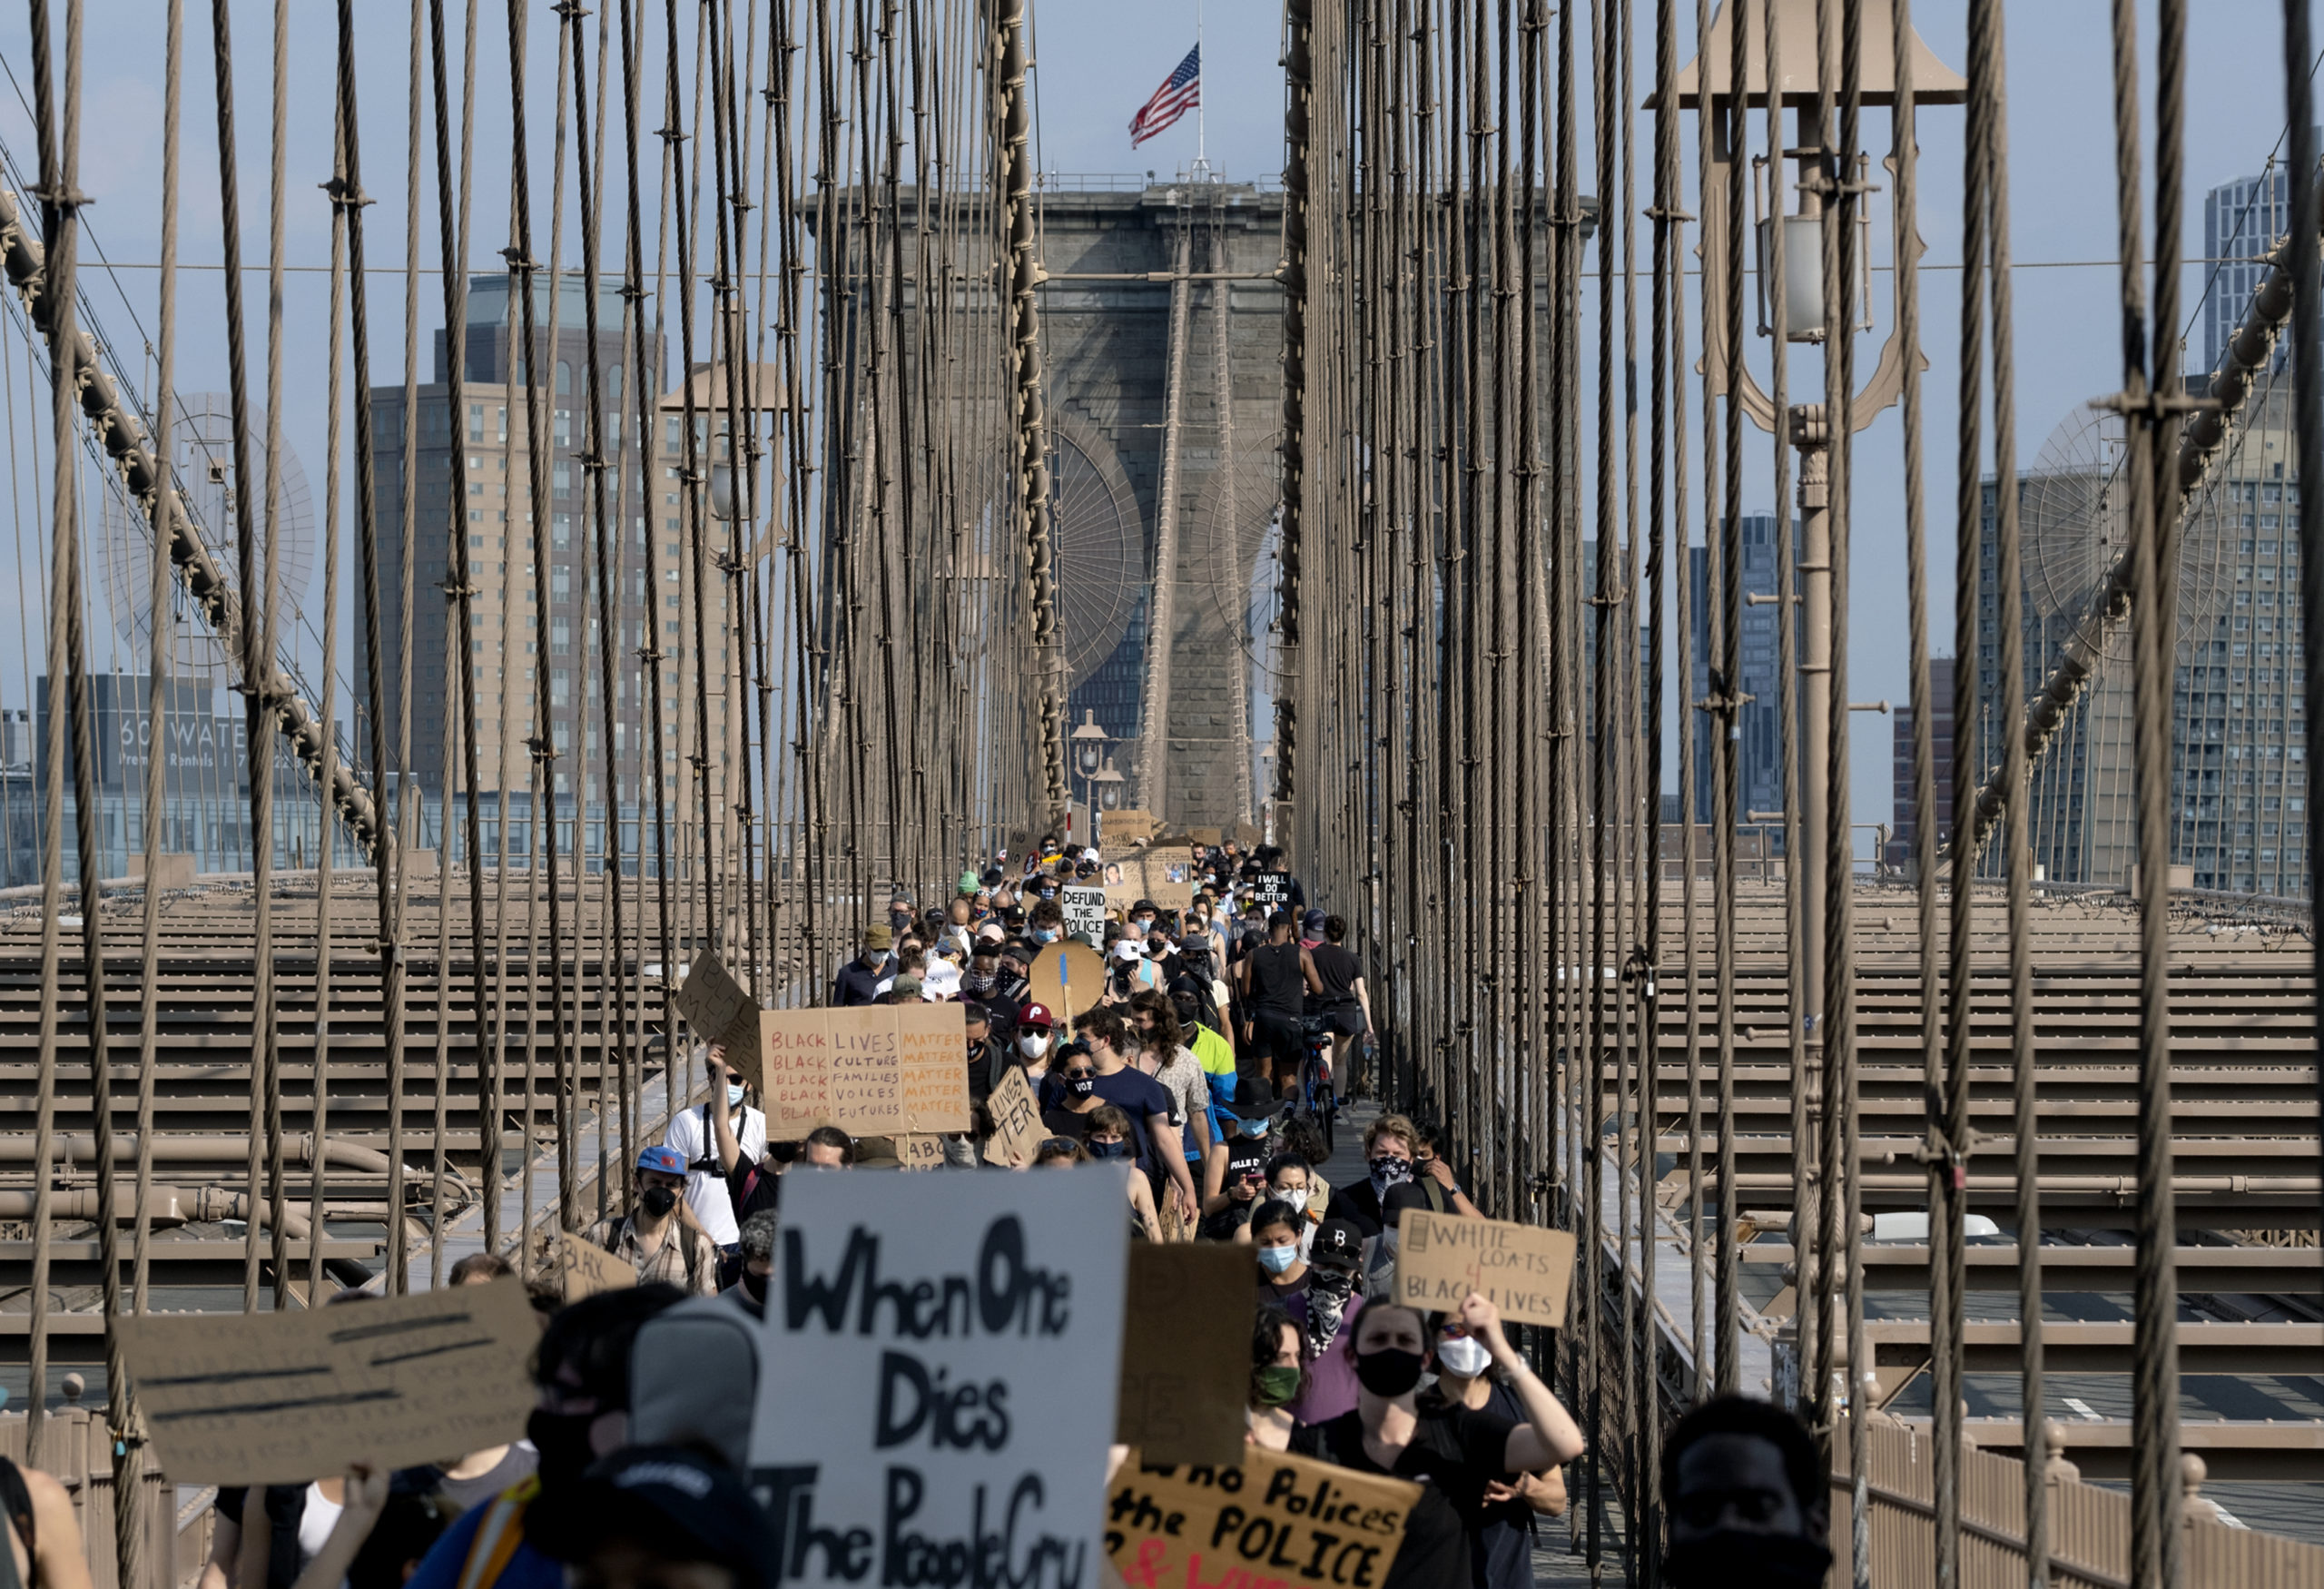 Protesters and activists walk across the Brooklyn Bridge, Saturday, June 6, 2020, in New York. Protests continued following the death of George Floyd, who died after being restrained by Minneapolis police officers on May 25. (AP Photo/Craig Ruttle)